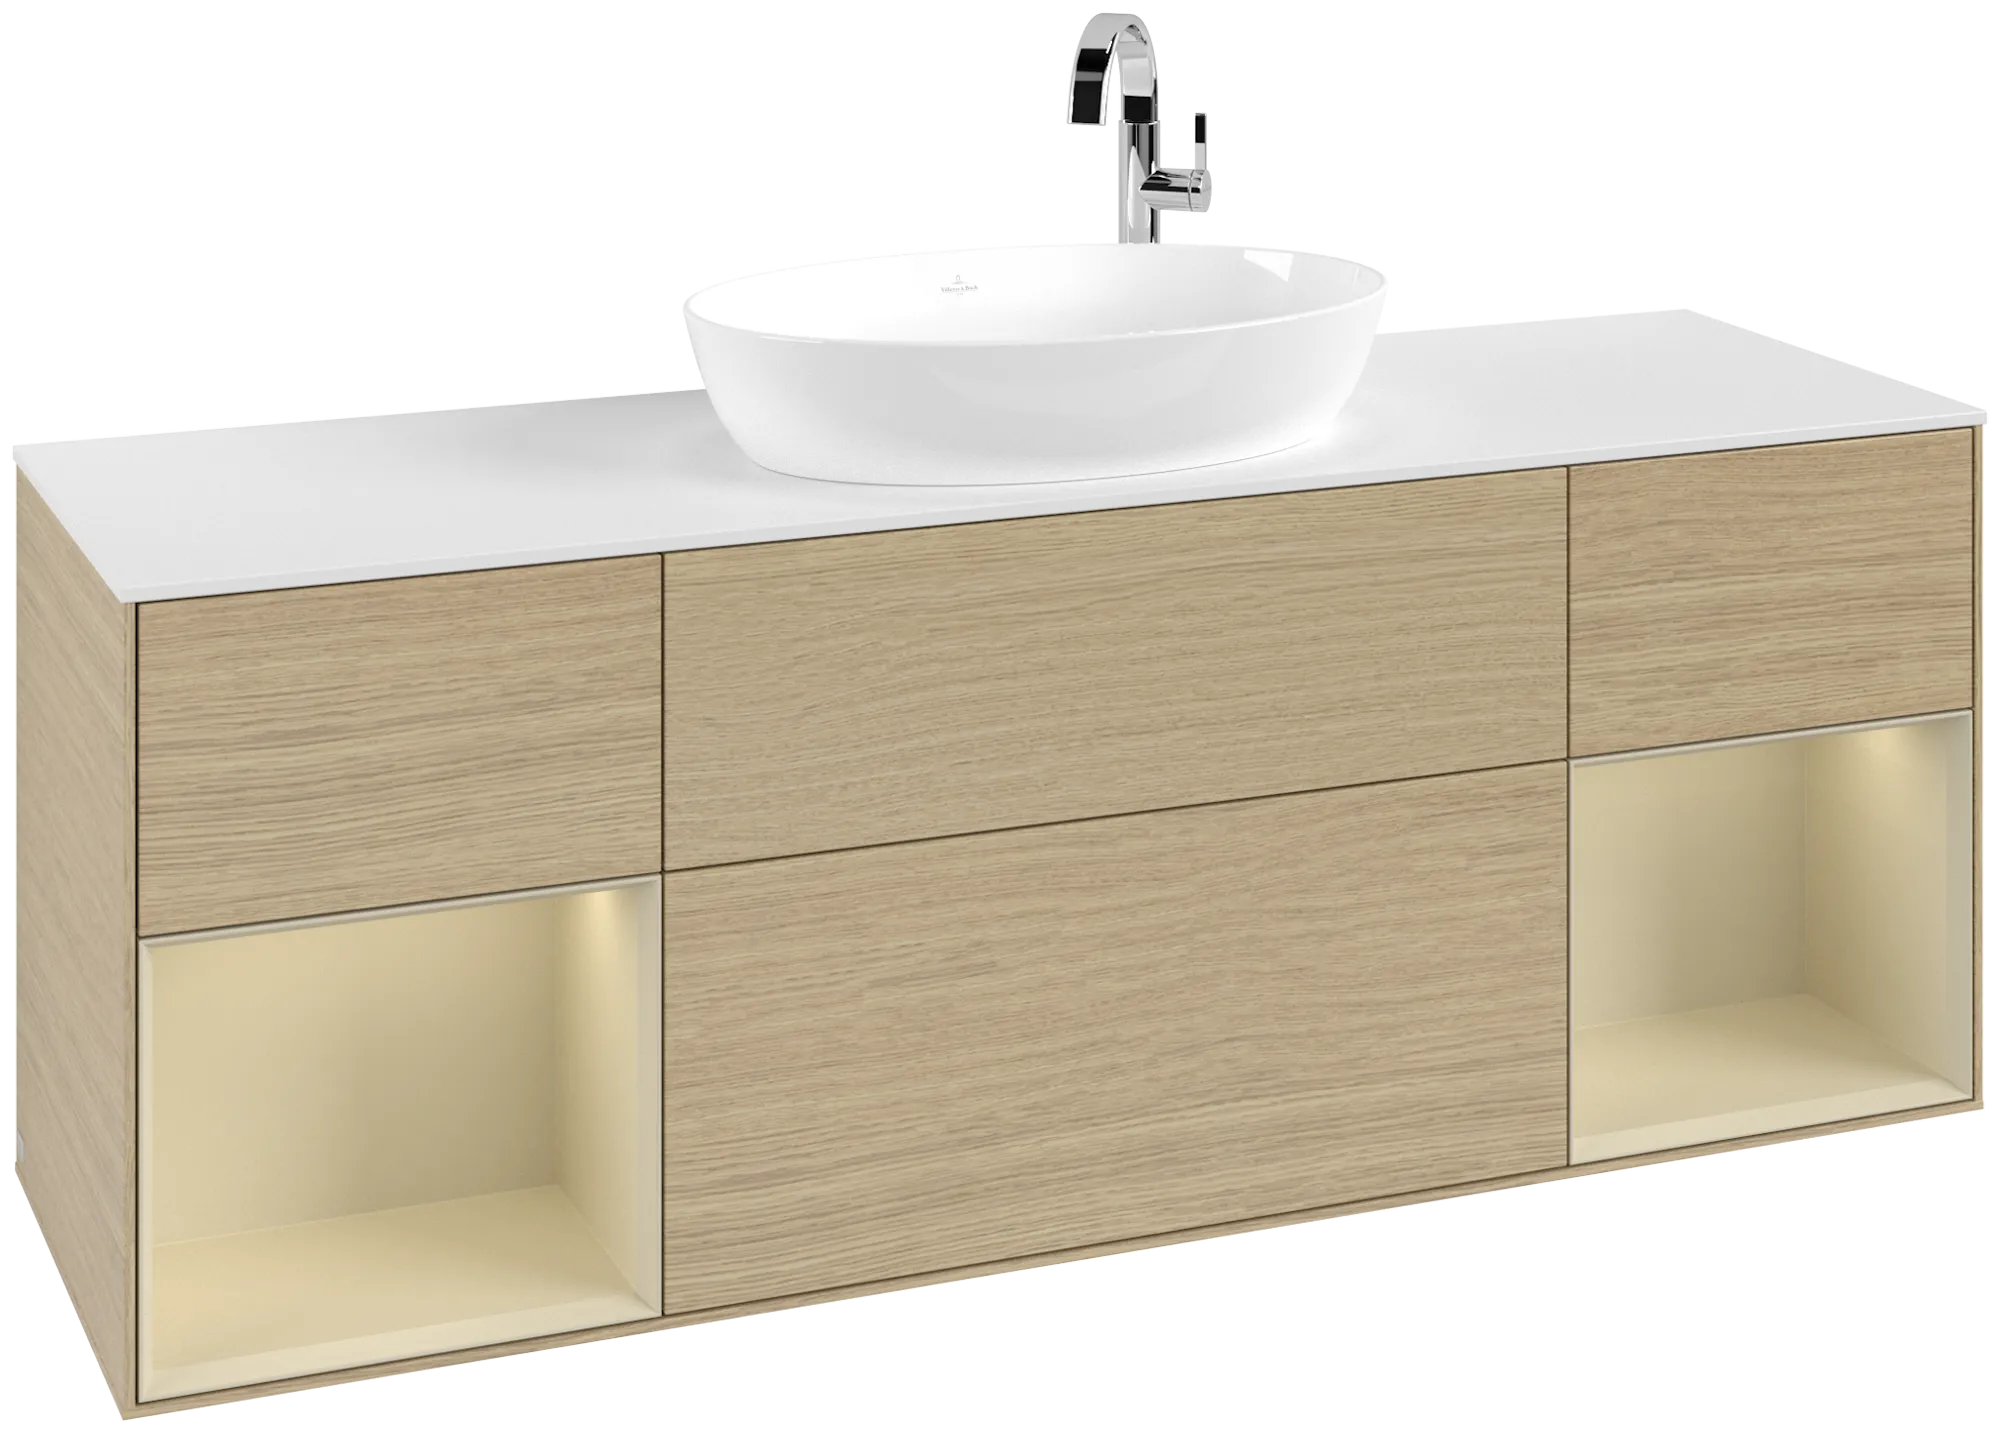 Picture of VILLEROY BOCH Finion Vanity unit, with lighting, 4 pull-out compartments, 1600 x 603 x 501 mm, Oak Veneer / Silk Grey Matt Lacquer / Glass White Matt #G981HJPC